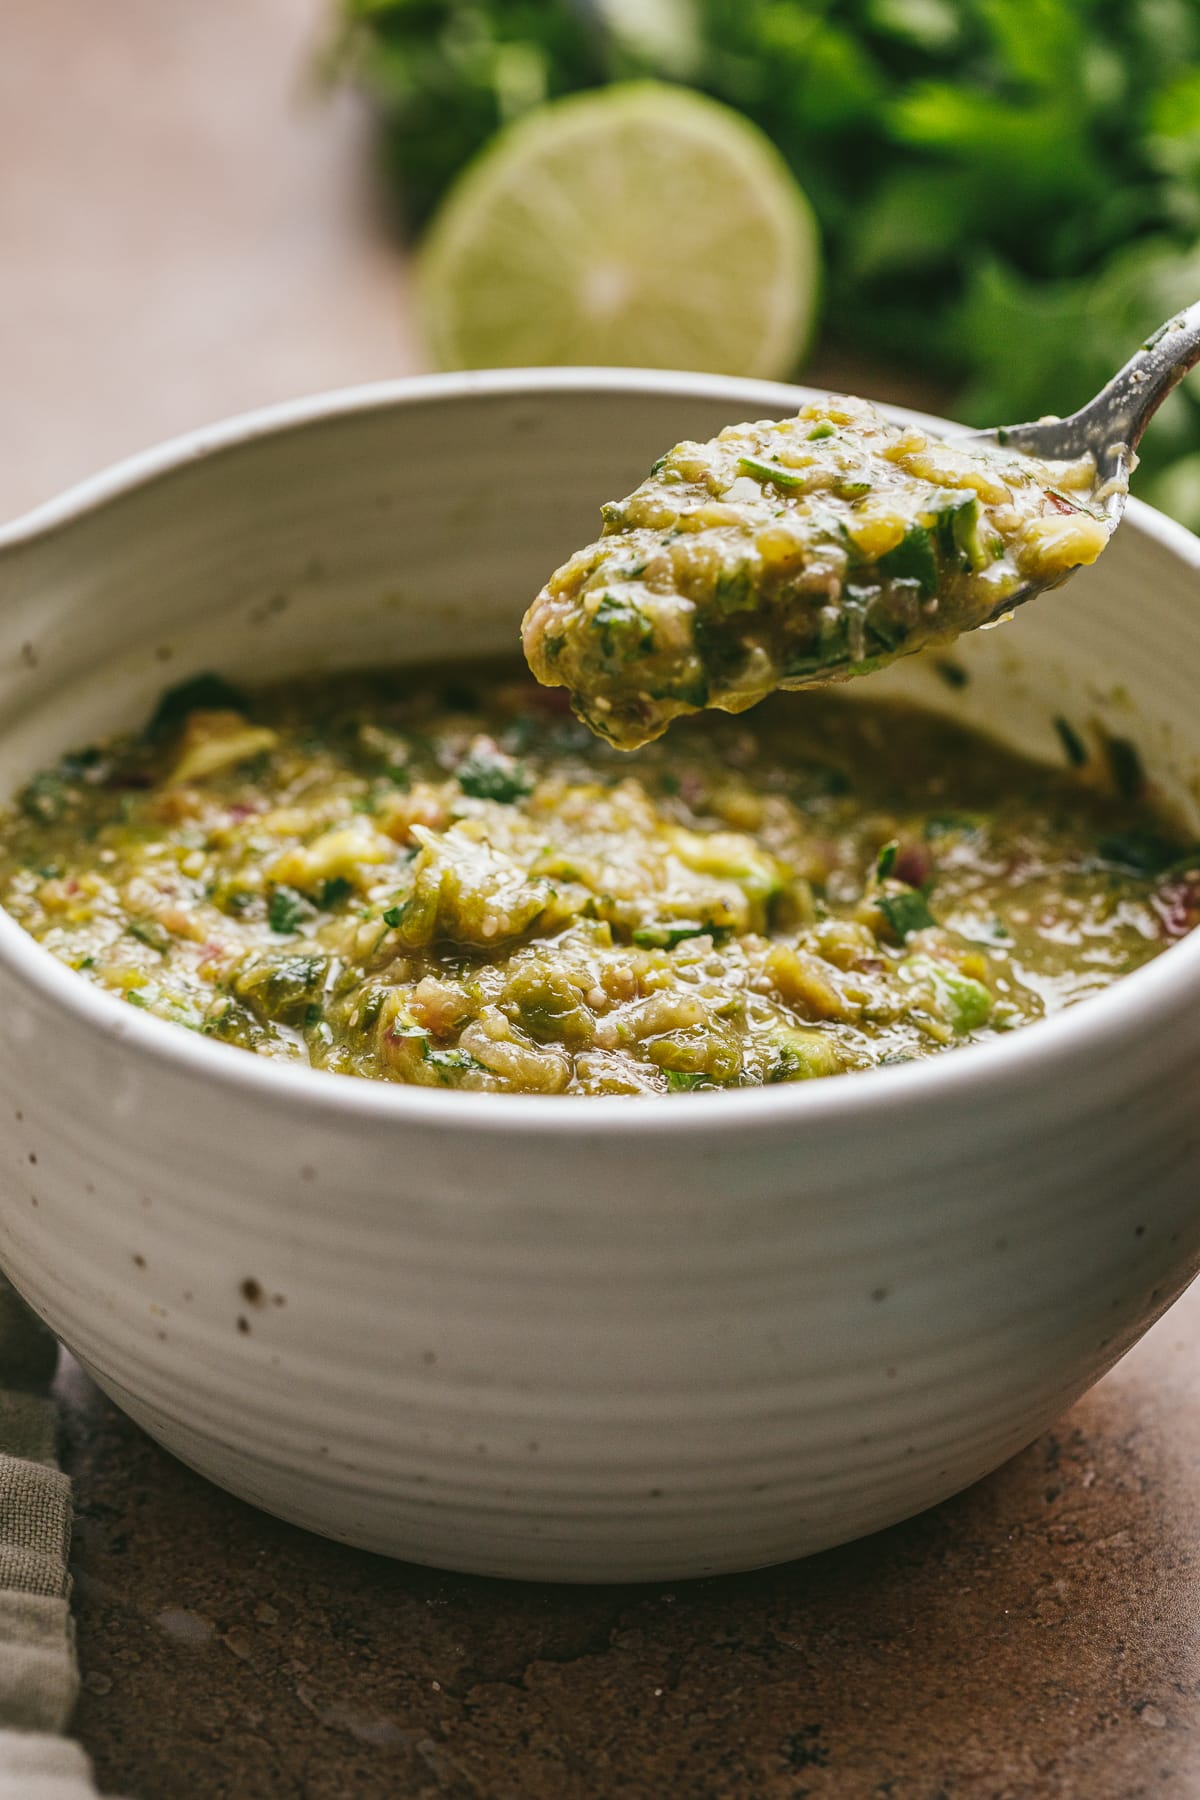 A spoonful of tomatillo green chili salsa from a white bowl.